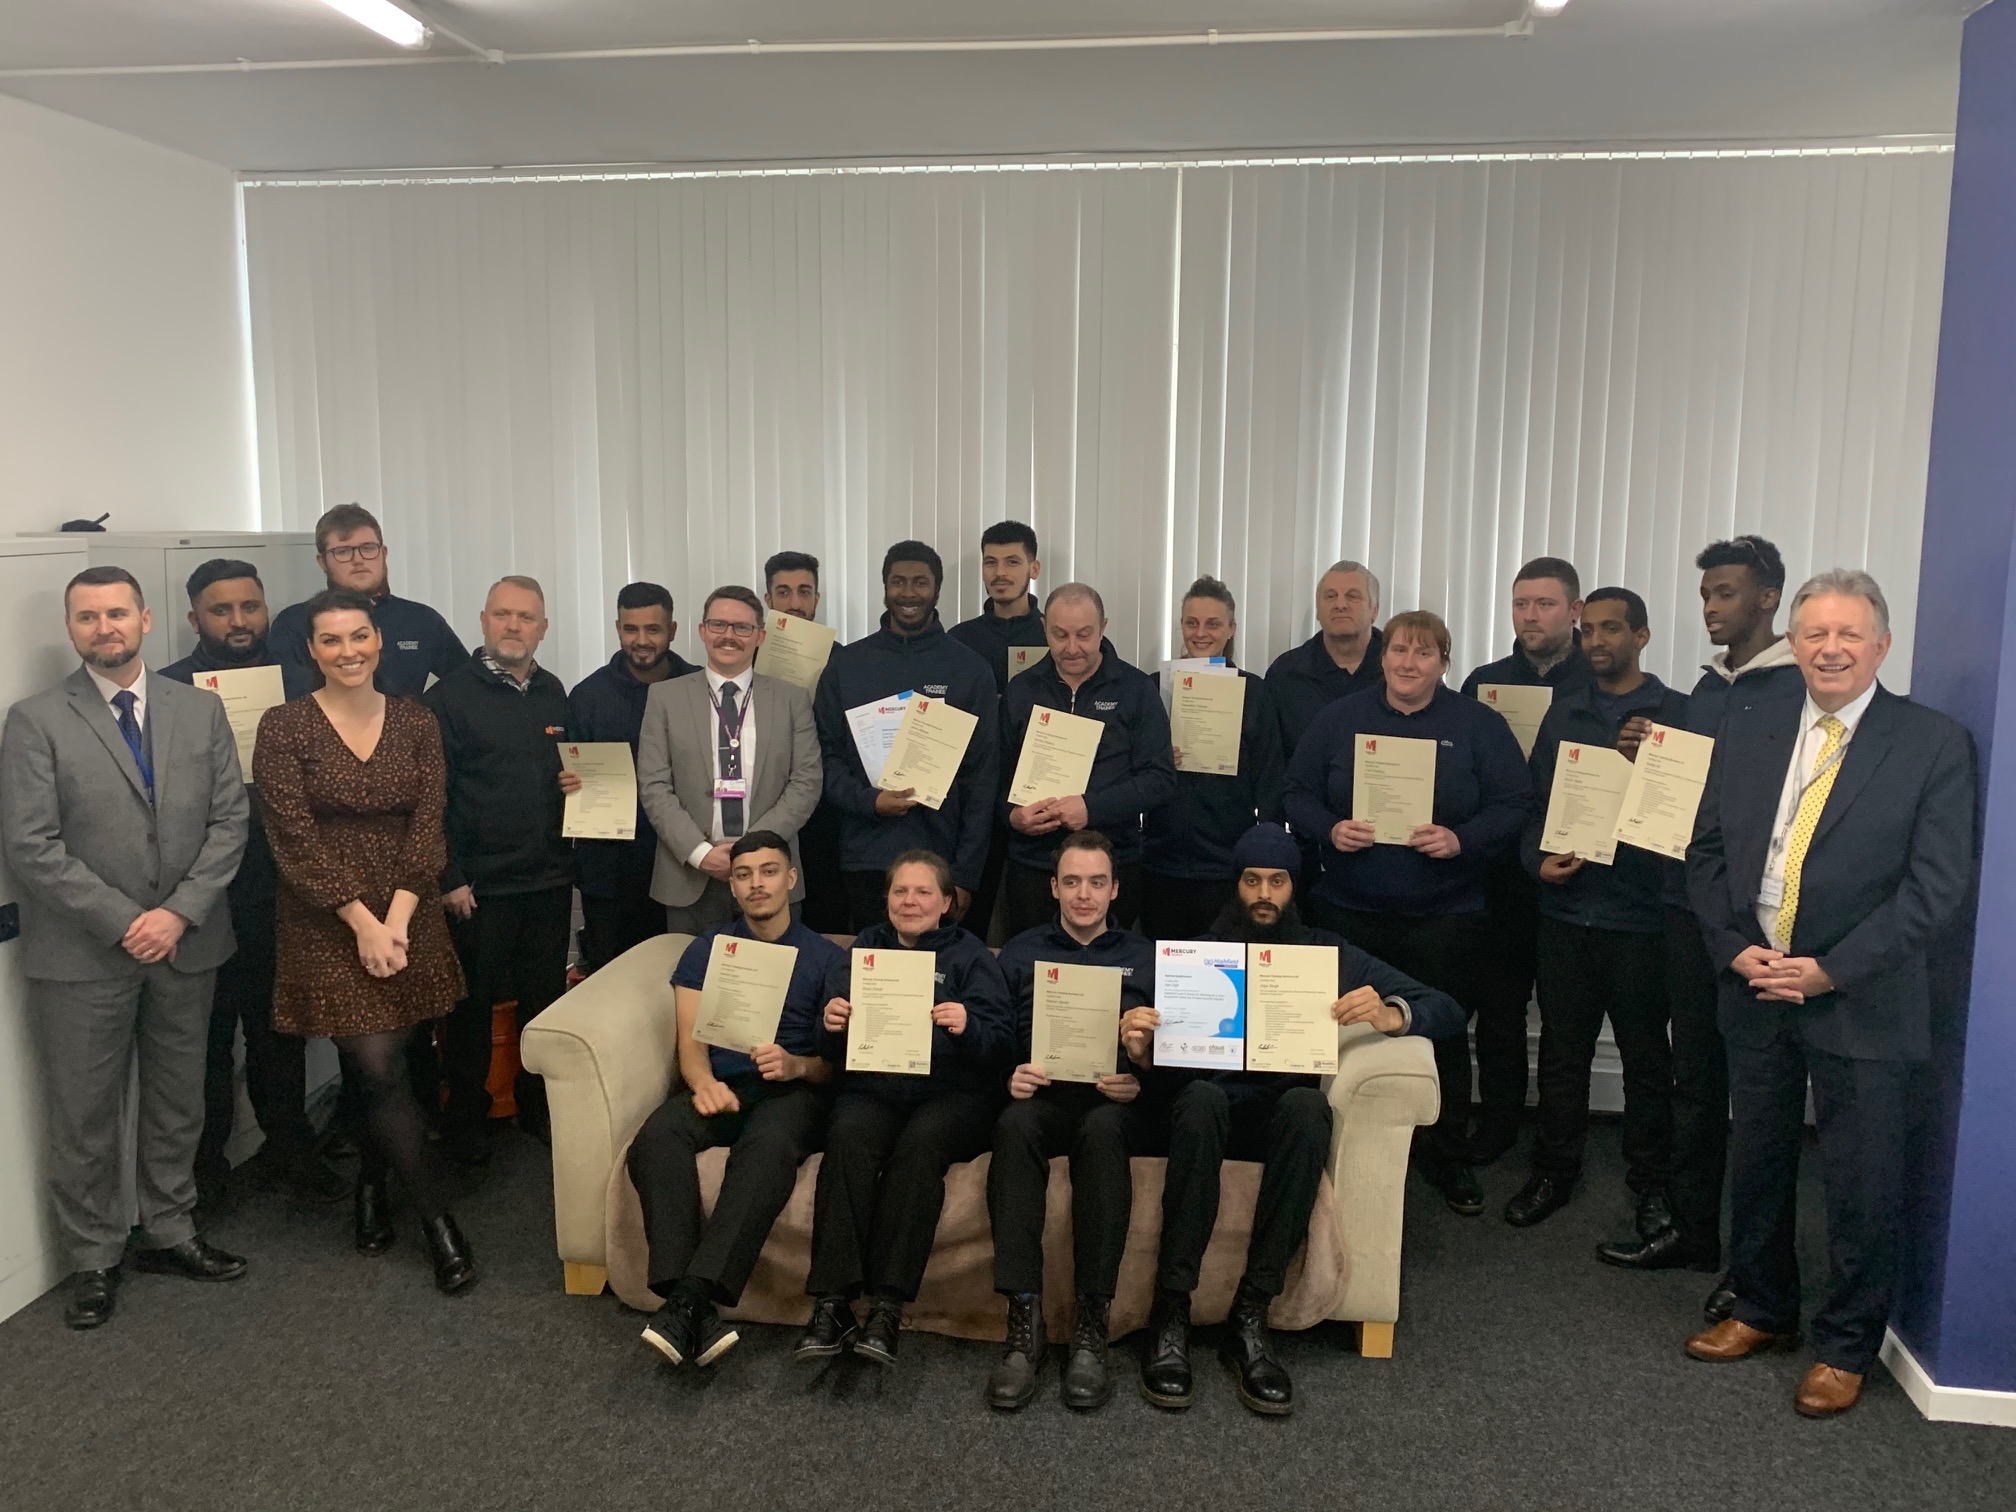 Nineteen learners celebrate getting new jobs in the security sector with (left) Paul Lawton-Jones from Mercury Training, (third left) Maria Randall from Man Commercial Protection, (seventh left) Graham Reynolds from Telford College and (right) Philip Tillman from the WMCA